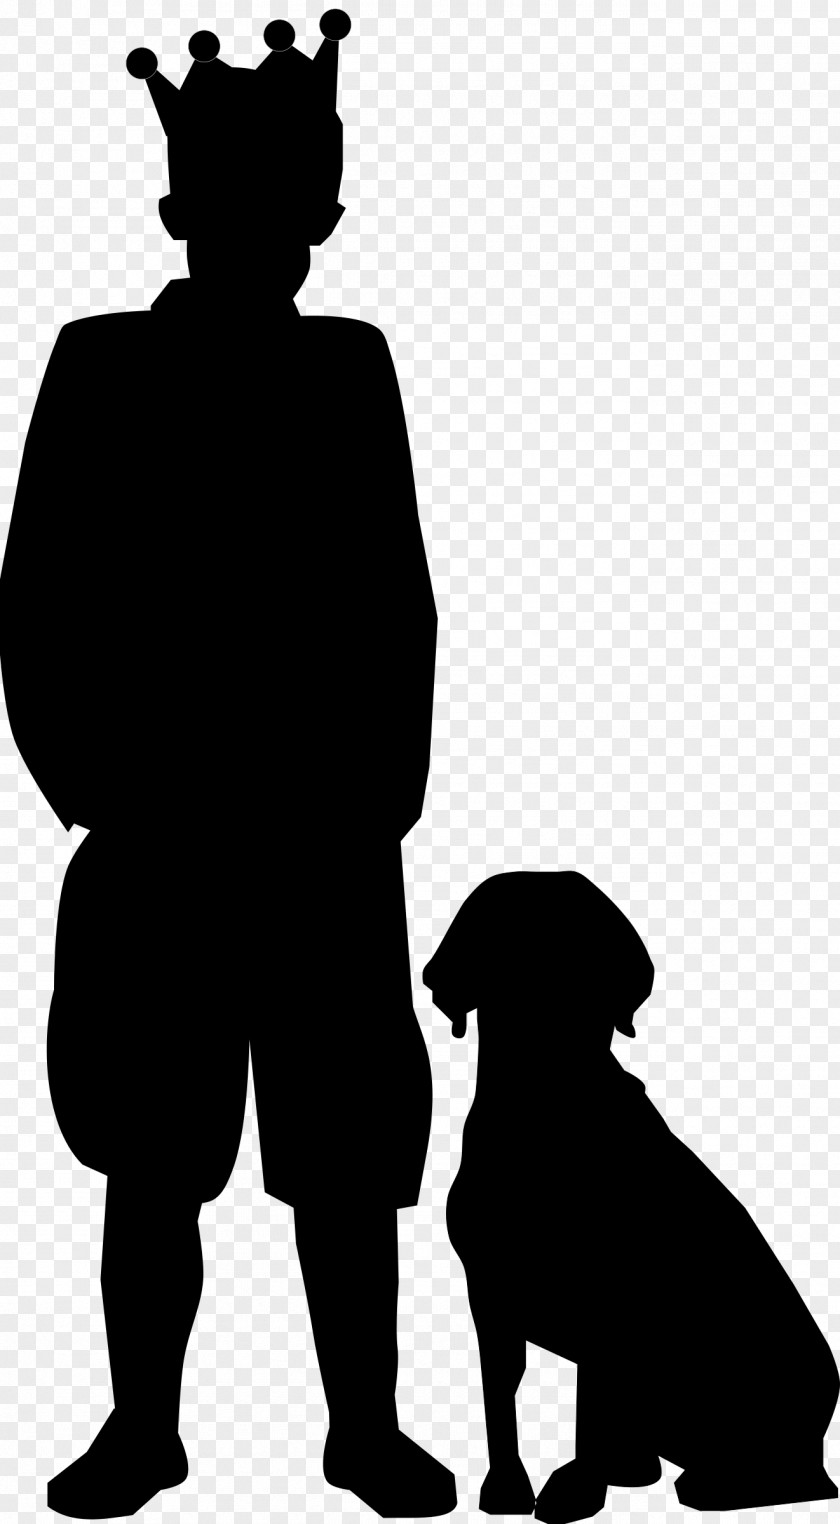 Animal Silhouettes Silhouette Dog Clip Art PNG